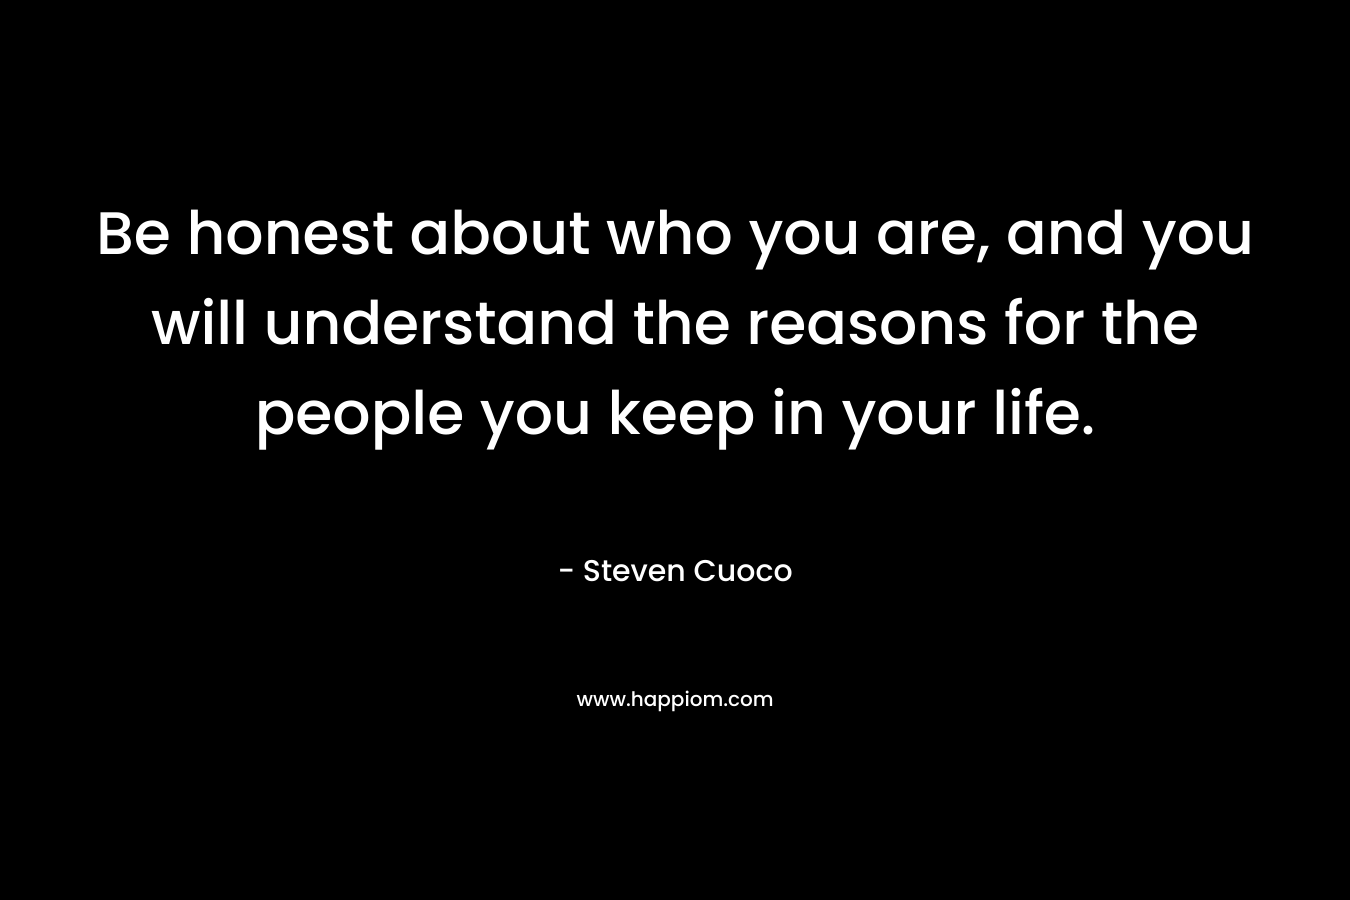 Be honest about who you are, and you will understand the reasons for the people you keep in your life.